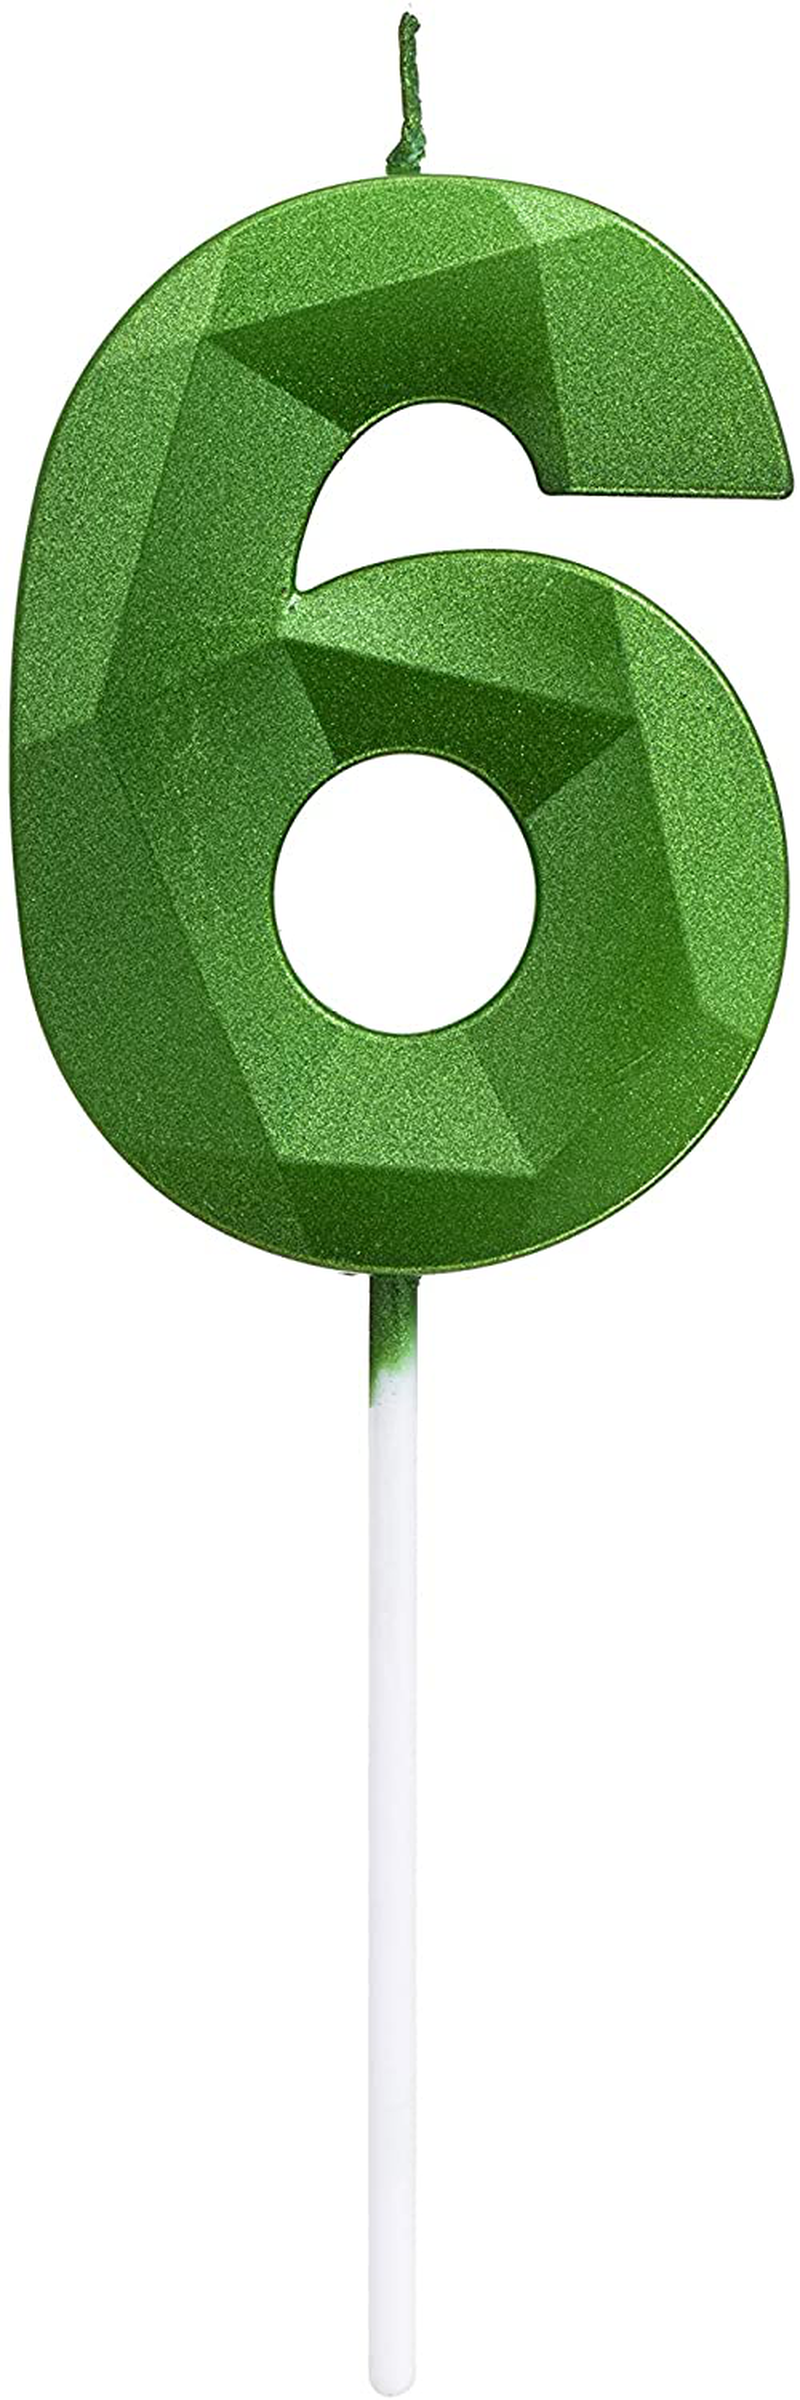 Green Happy Birthday Cake Candles,Wedding Cake Number Candles,3D Design Cake Topper Decoration for Party Kids Adults (Green Number 6)